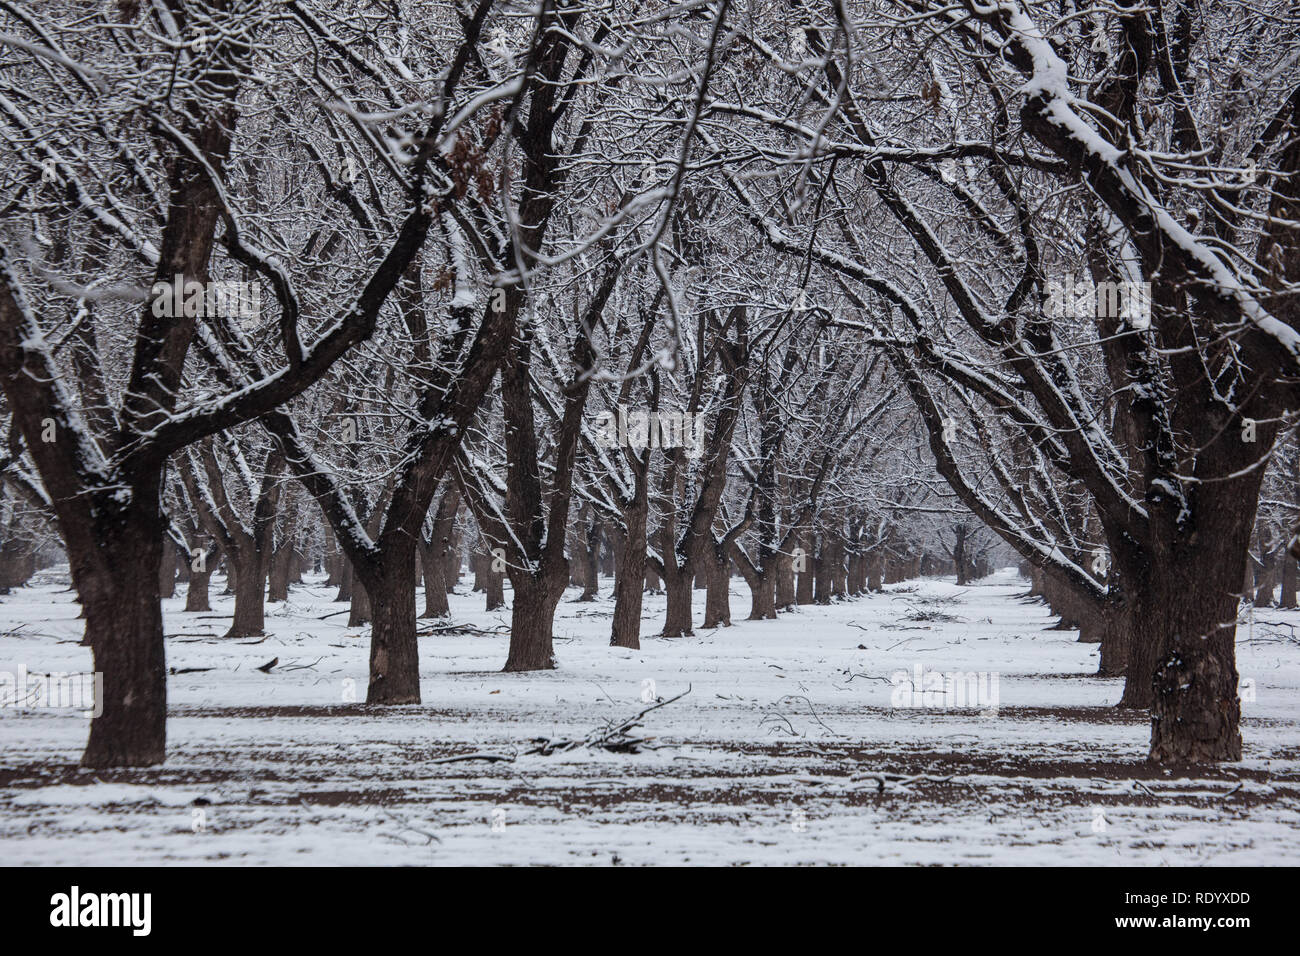 Wet snow covers rows of pecan trees in a grove in the Mesilla Valley of New Mexico near Las Cruces Stock Photo